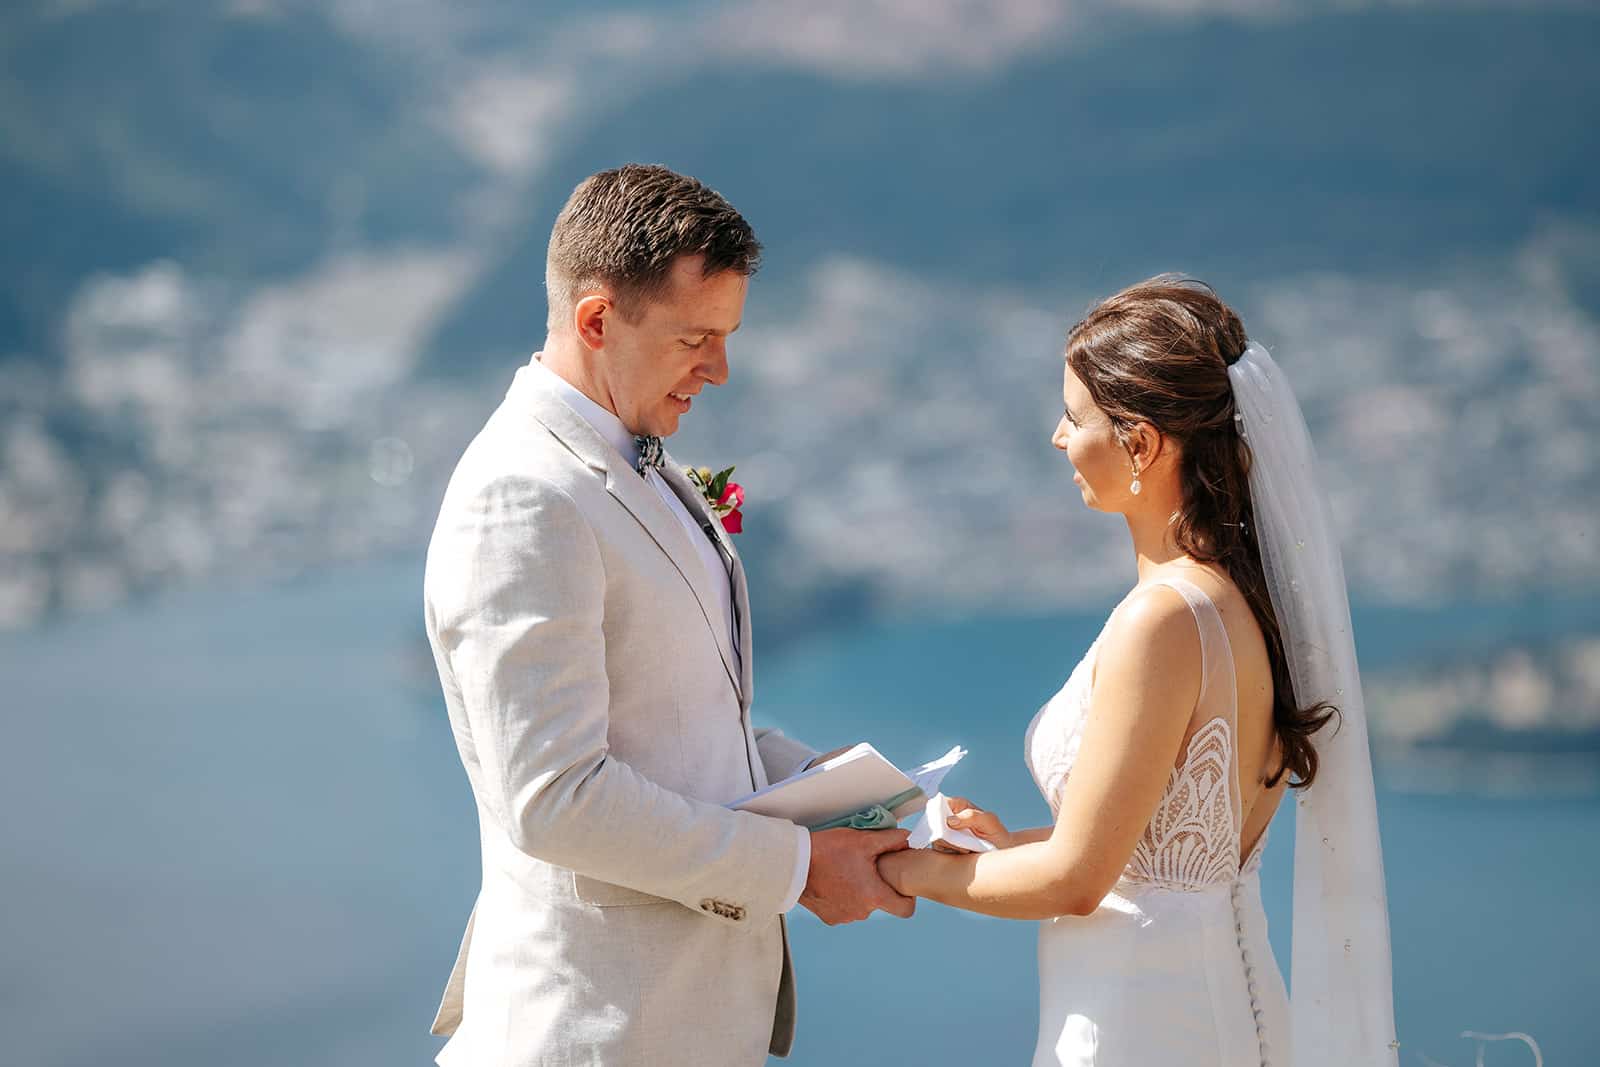 Heli Wedding on The Ledge in Queenstown